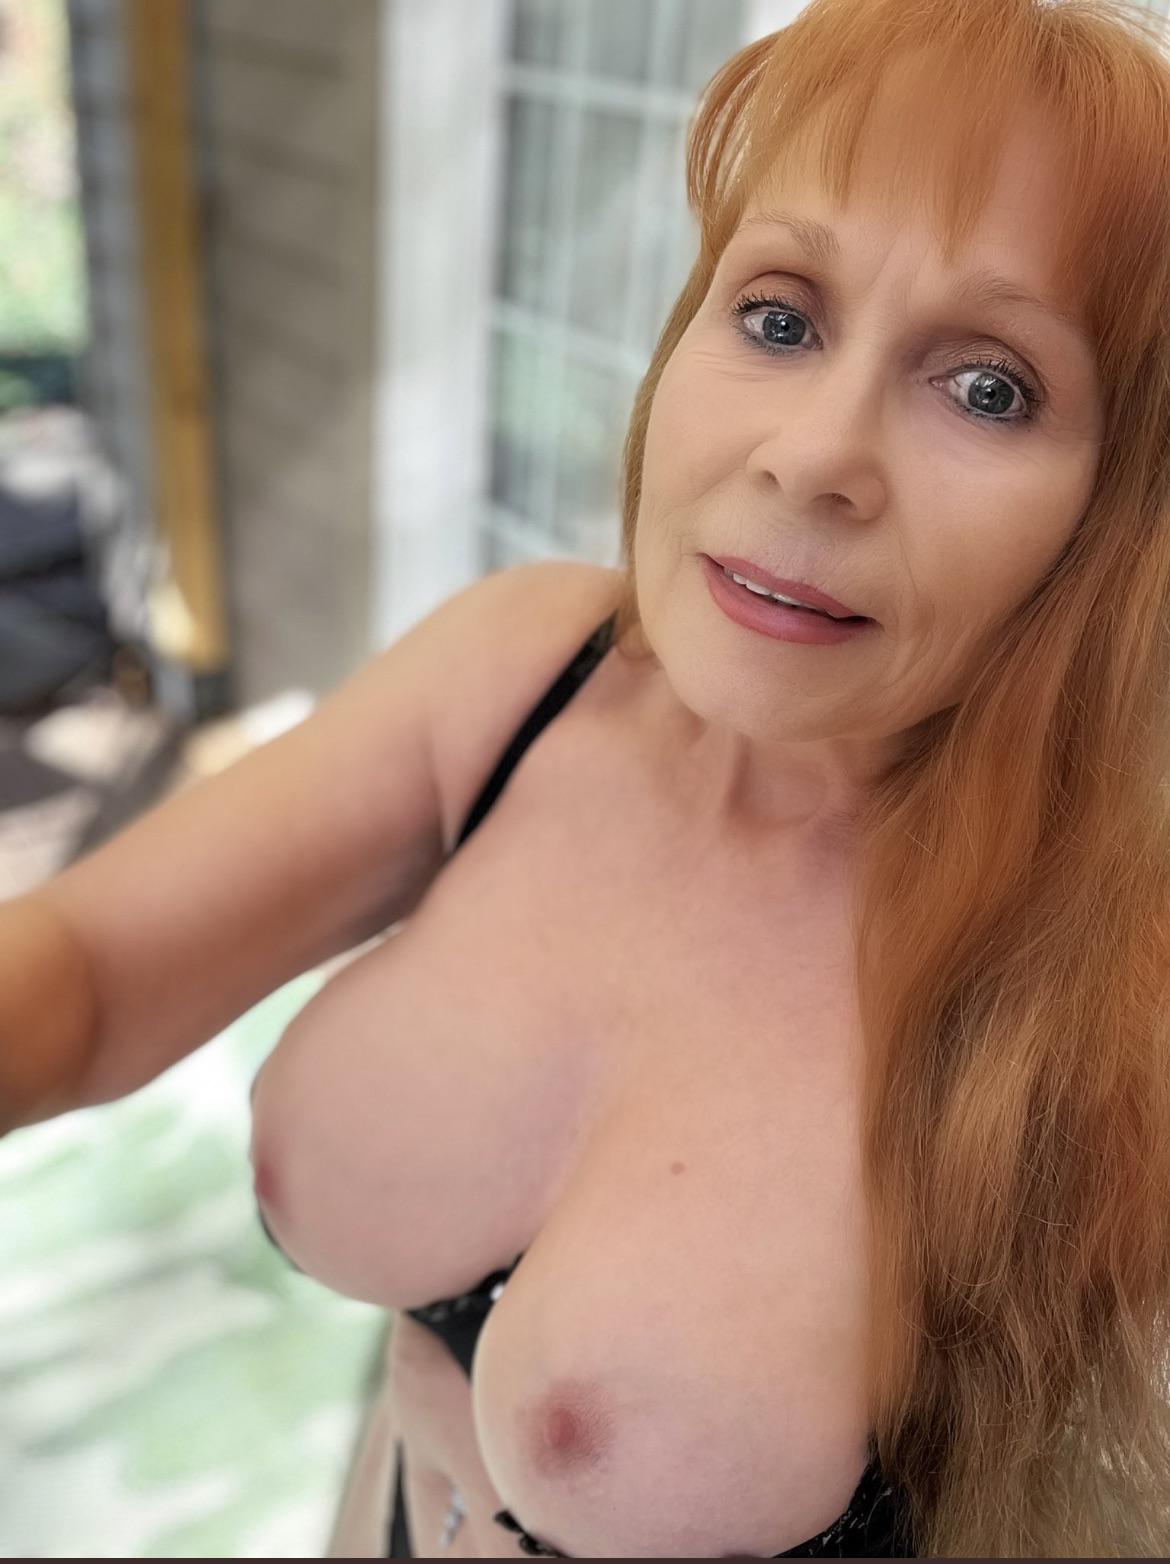 Horny 62 Granny waiting for a baby to cum in me picture pic